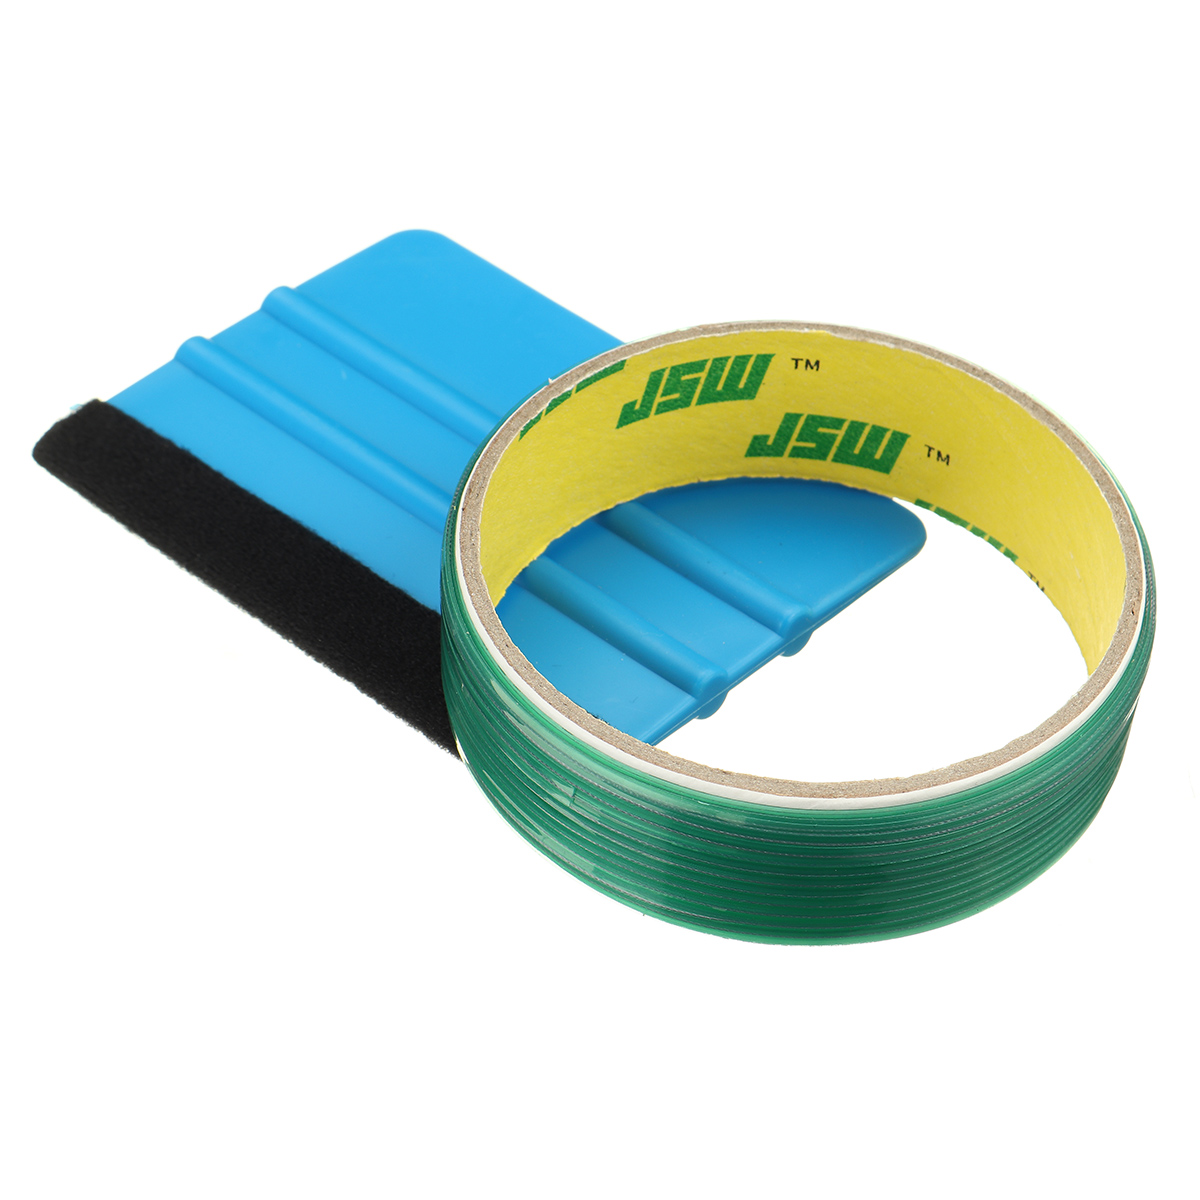 5101550m-Finish-Line-Tape-Wrapping-Vinyl-Films-Decals-Rolls-Wrap-Tape-1701004-1